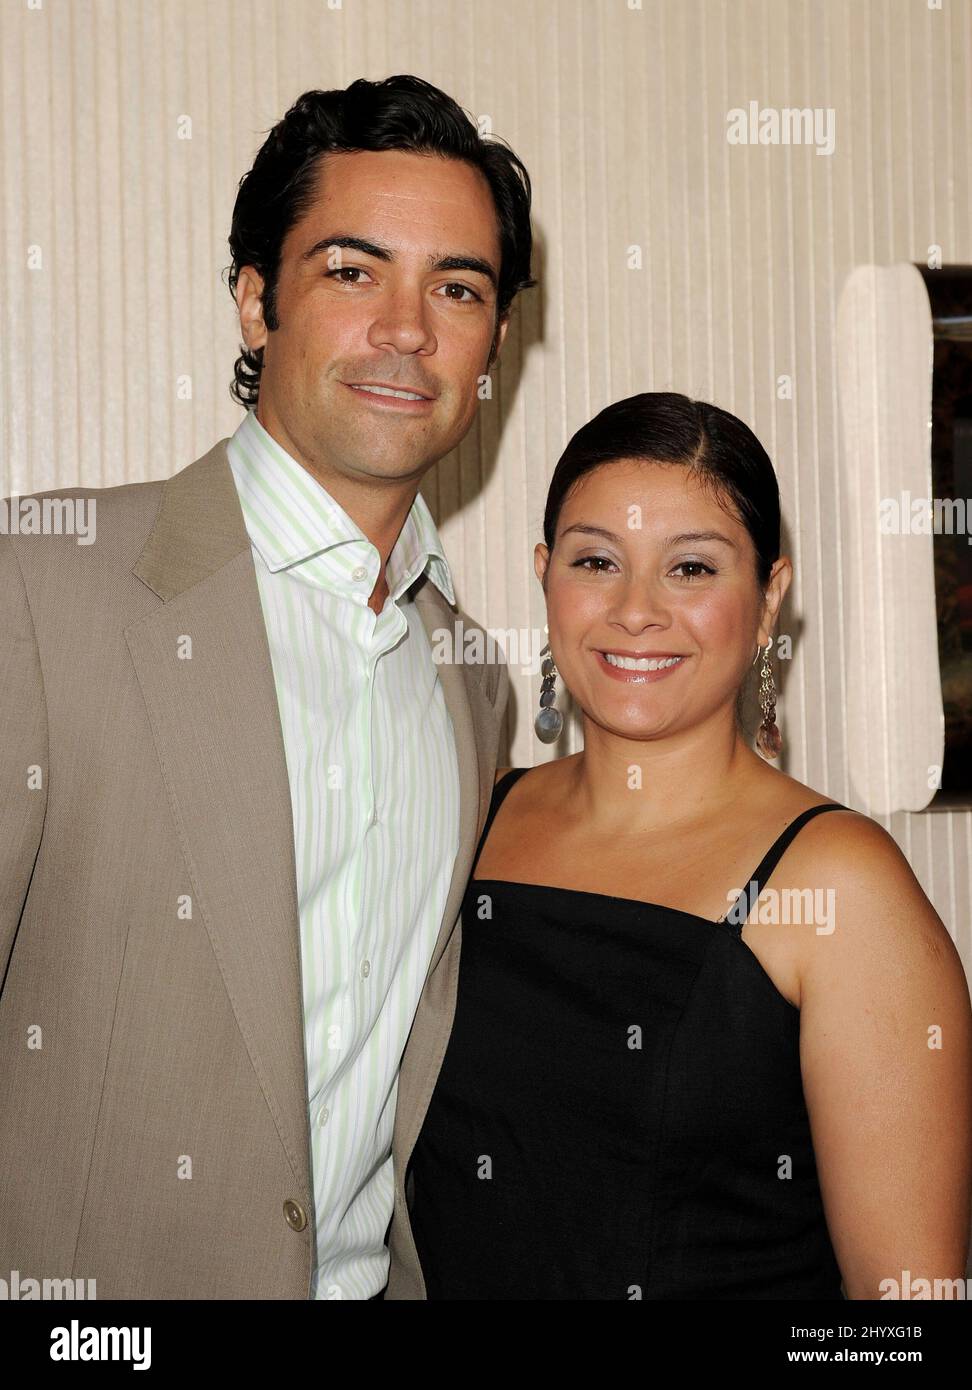 Danny Pino and his wife during the 2010 Annual Imagen Awards held at the Beverly Hilton, California Stock Photo